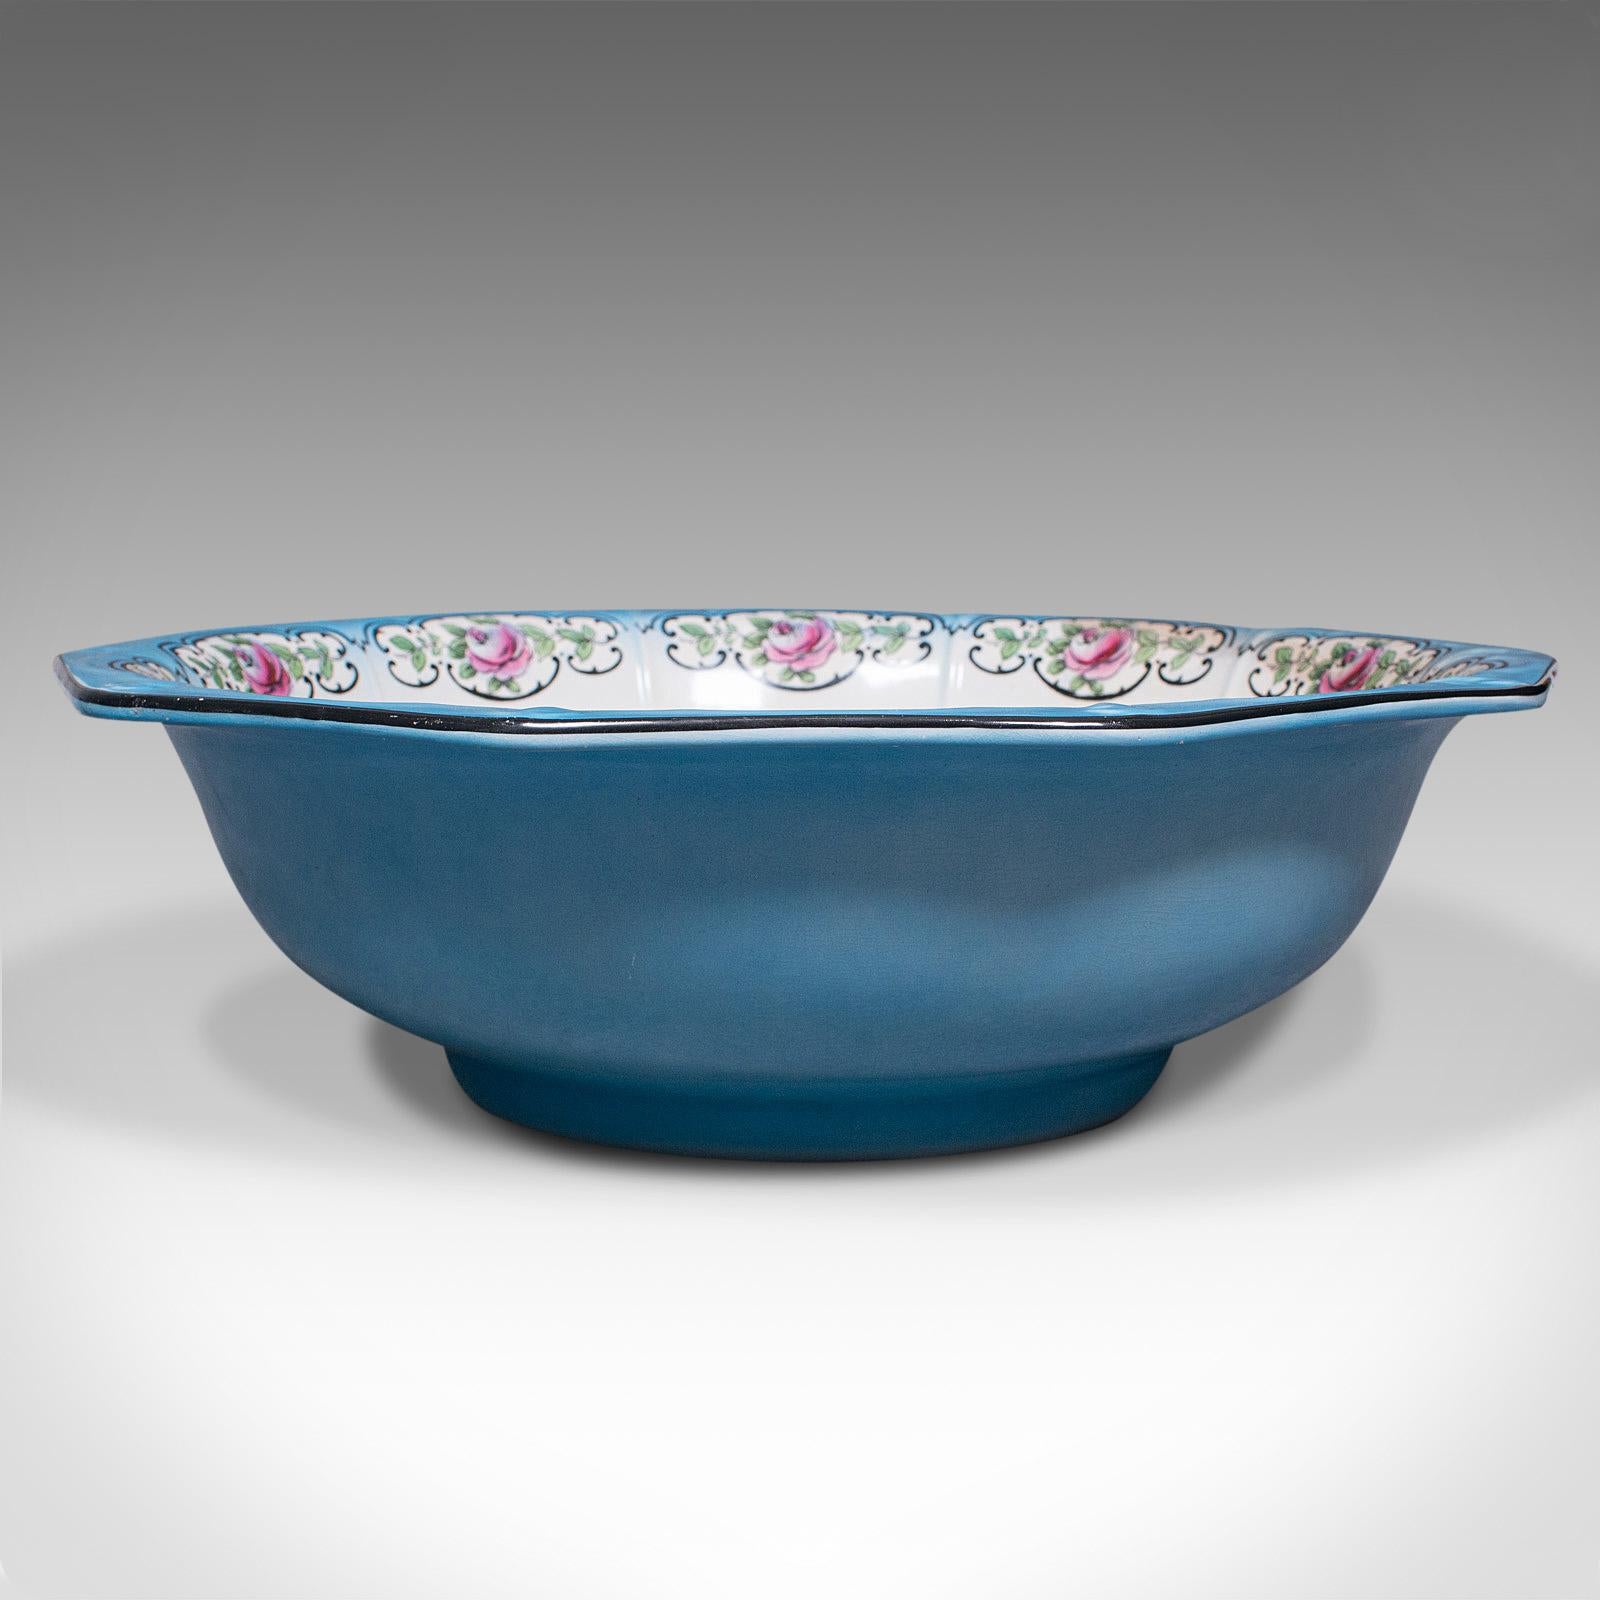 This is a large vintage serving bowl. An English, ceramic fruit dish, dating to the mid 20th century, circa 1930.

Graced with wonderful colour and generous proportion
Displays a desirable aged patina throughout
Bright blue ceramic body with